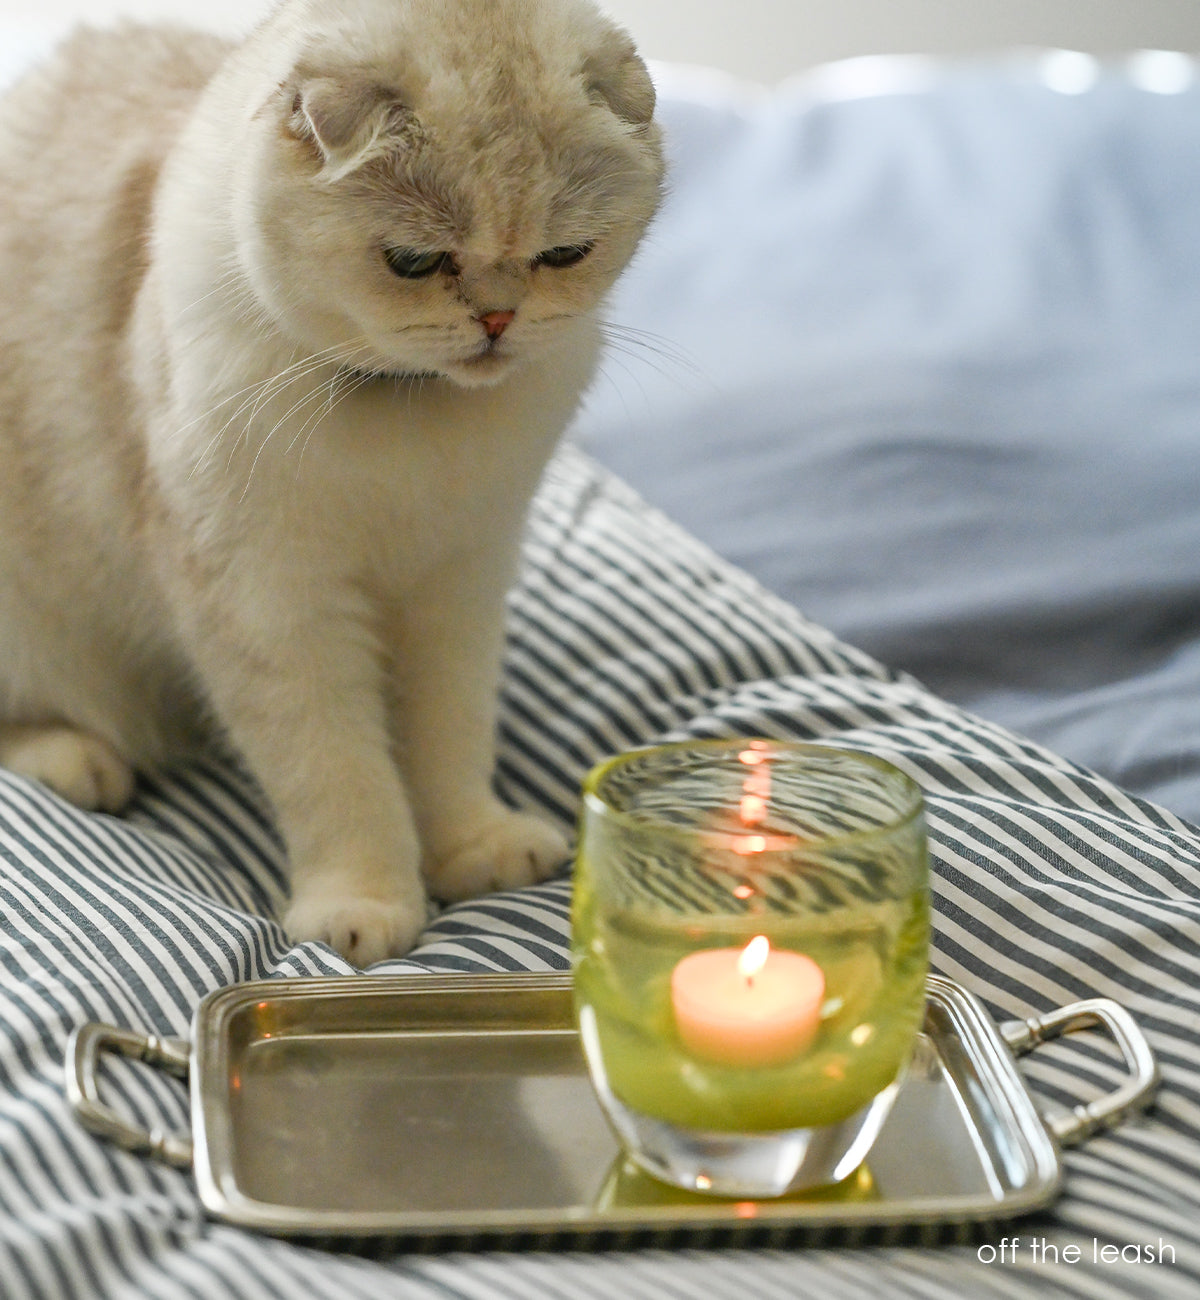 off the leash is a moss green hand-blown glass votive candle holder. transparent towards the top.